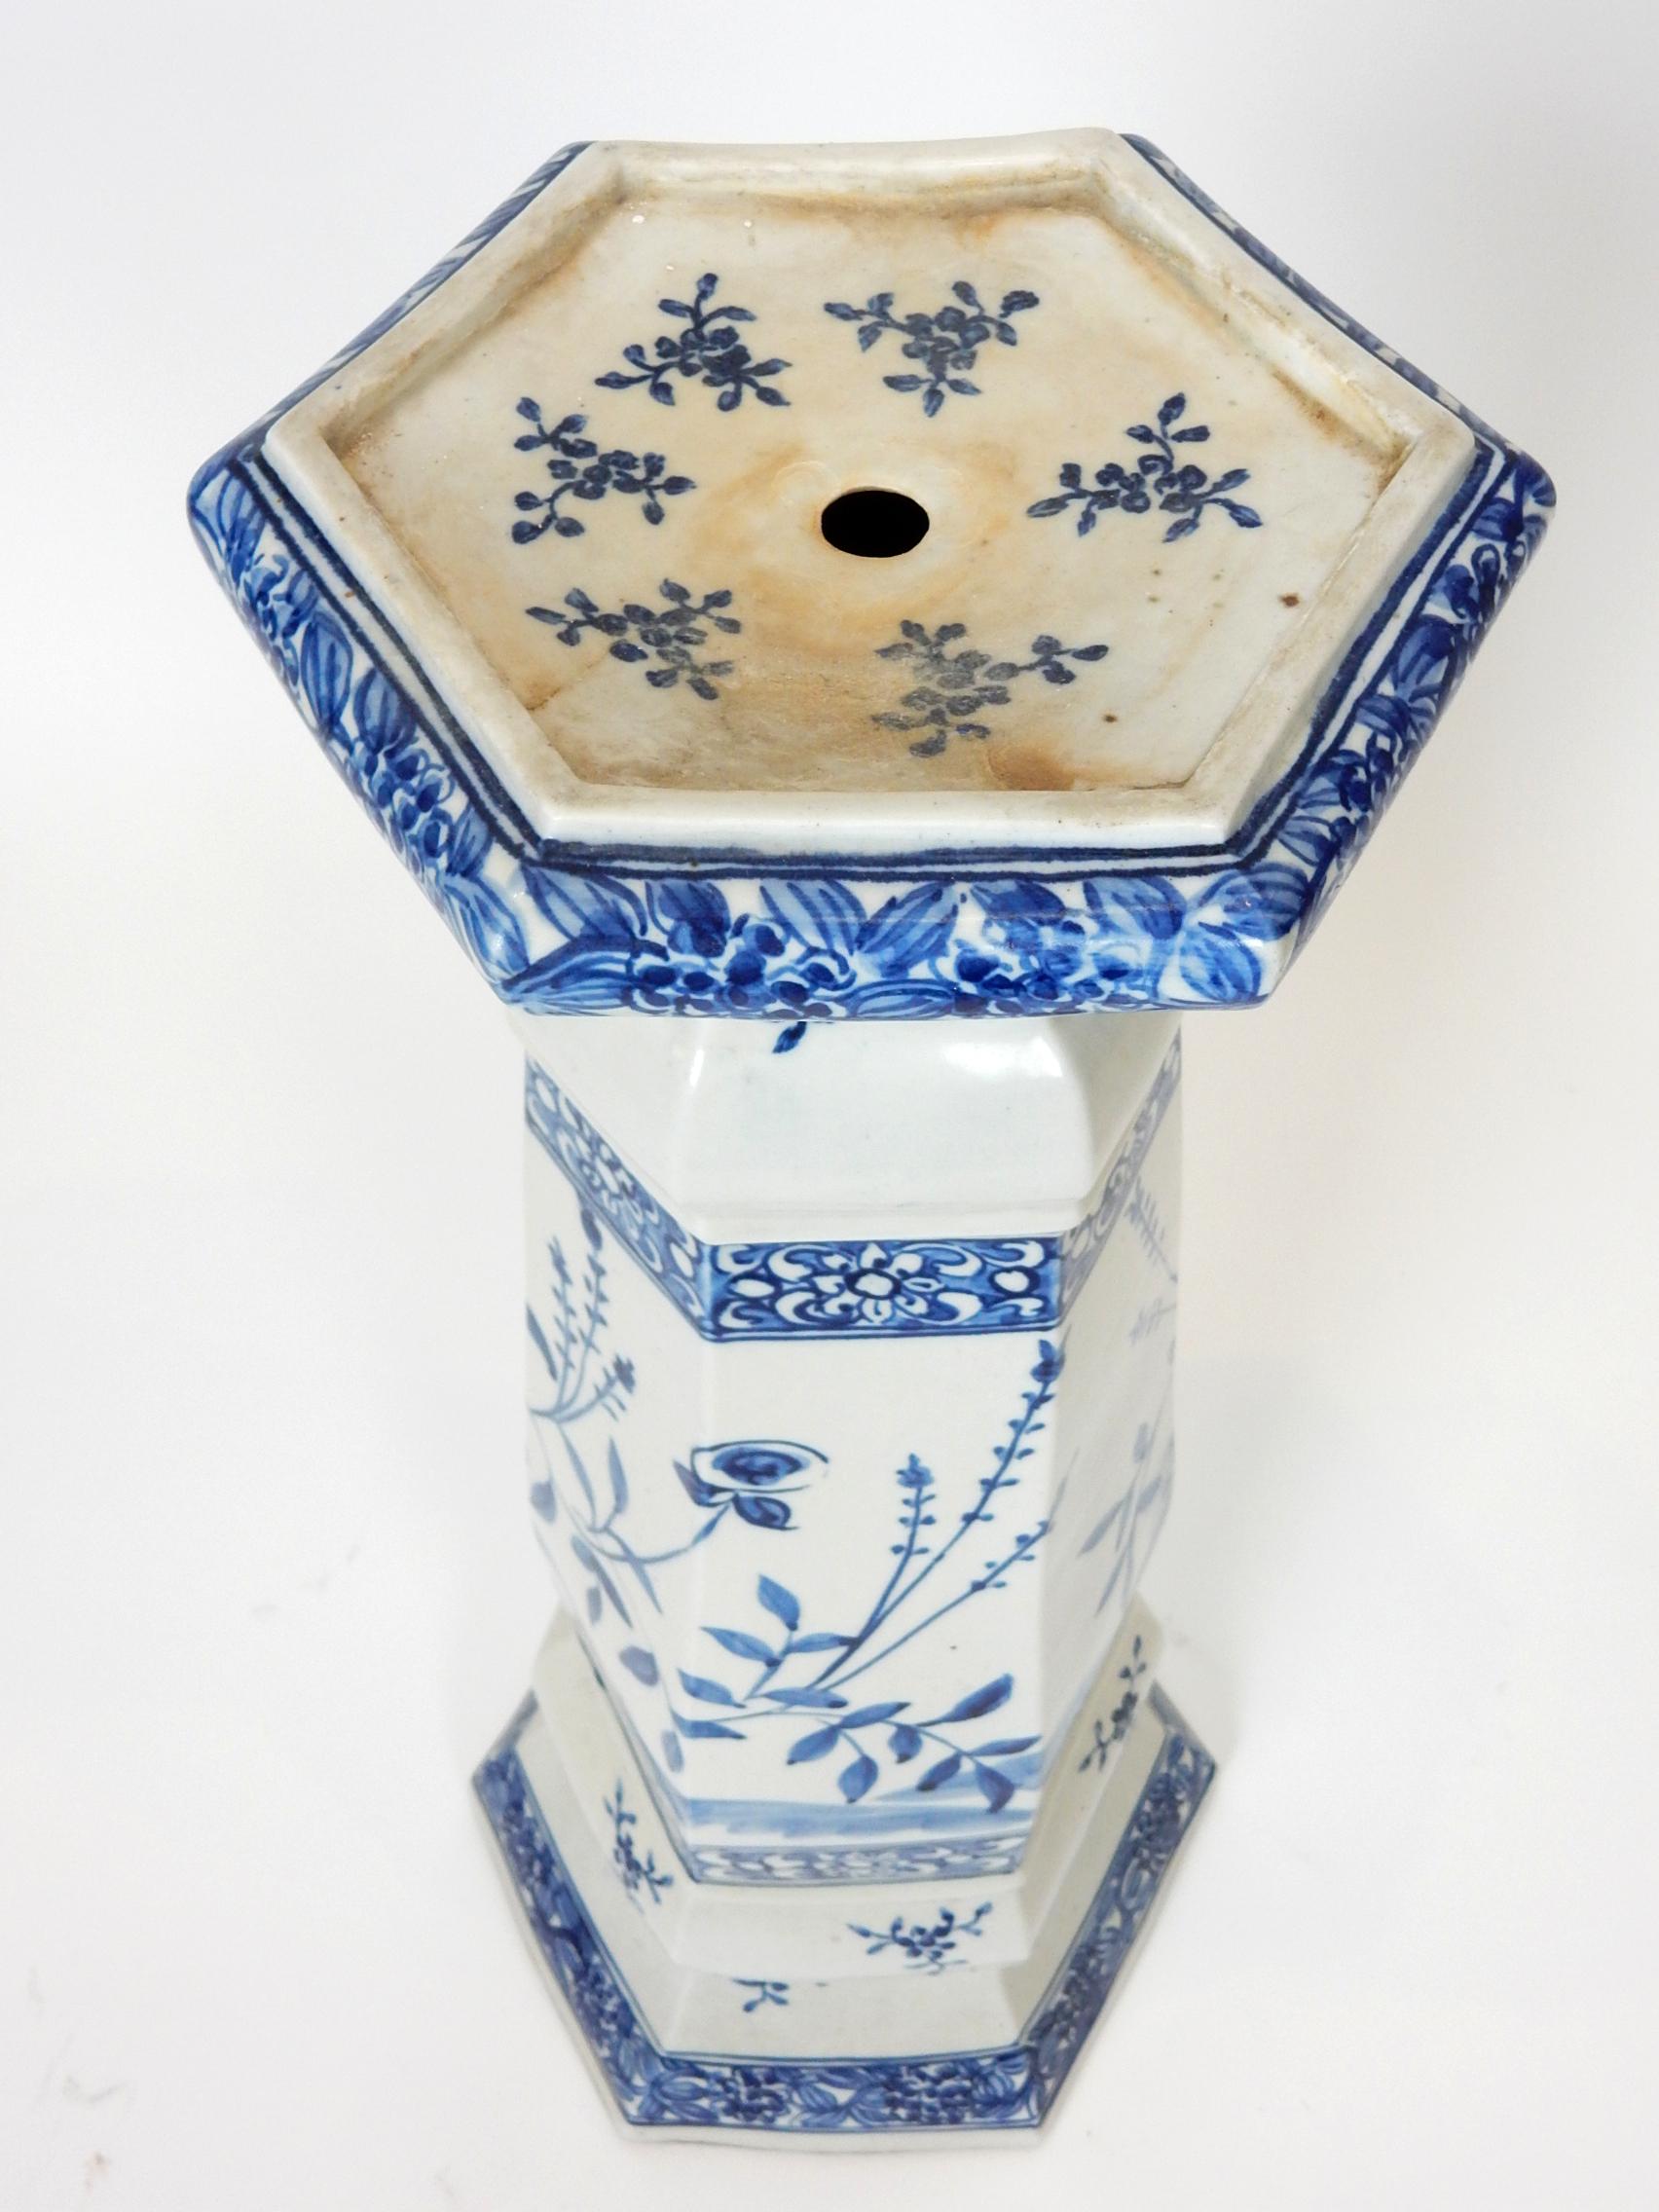 Chinoiserie 19thc Antique Chinese Blue and White Porcelain Jardinière Planter